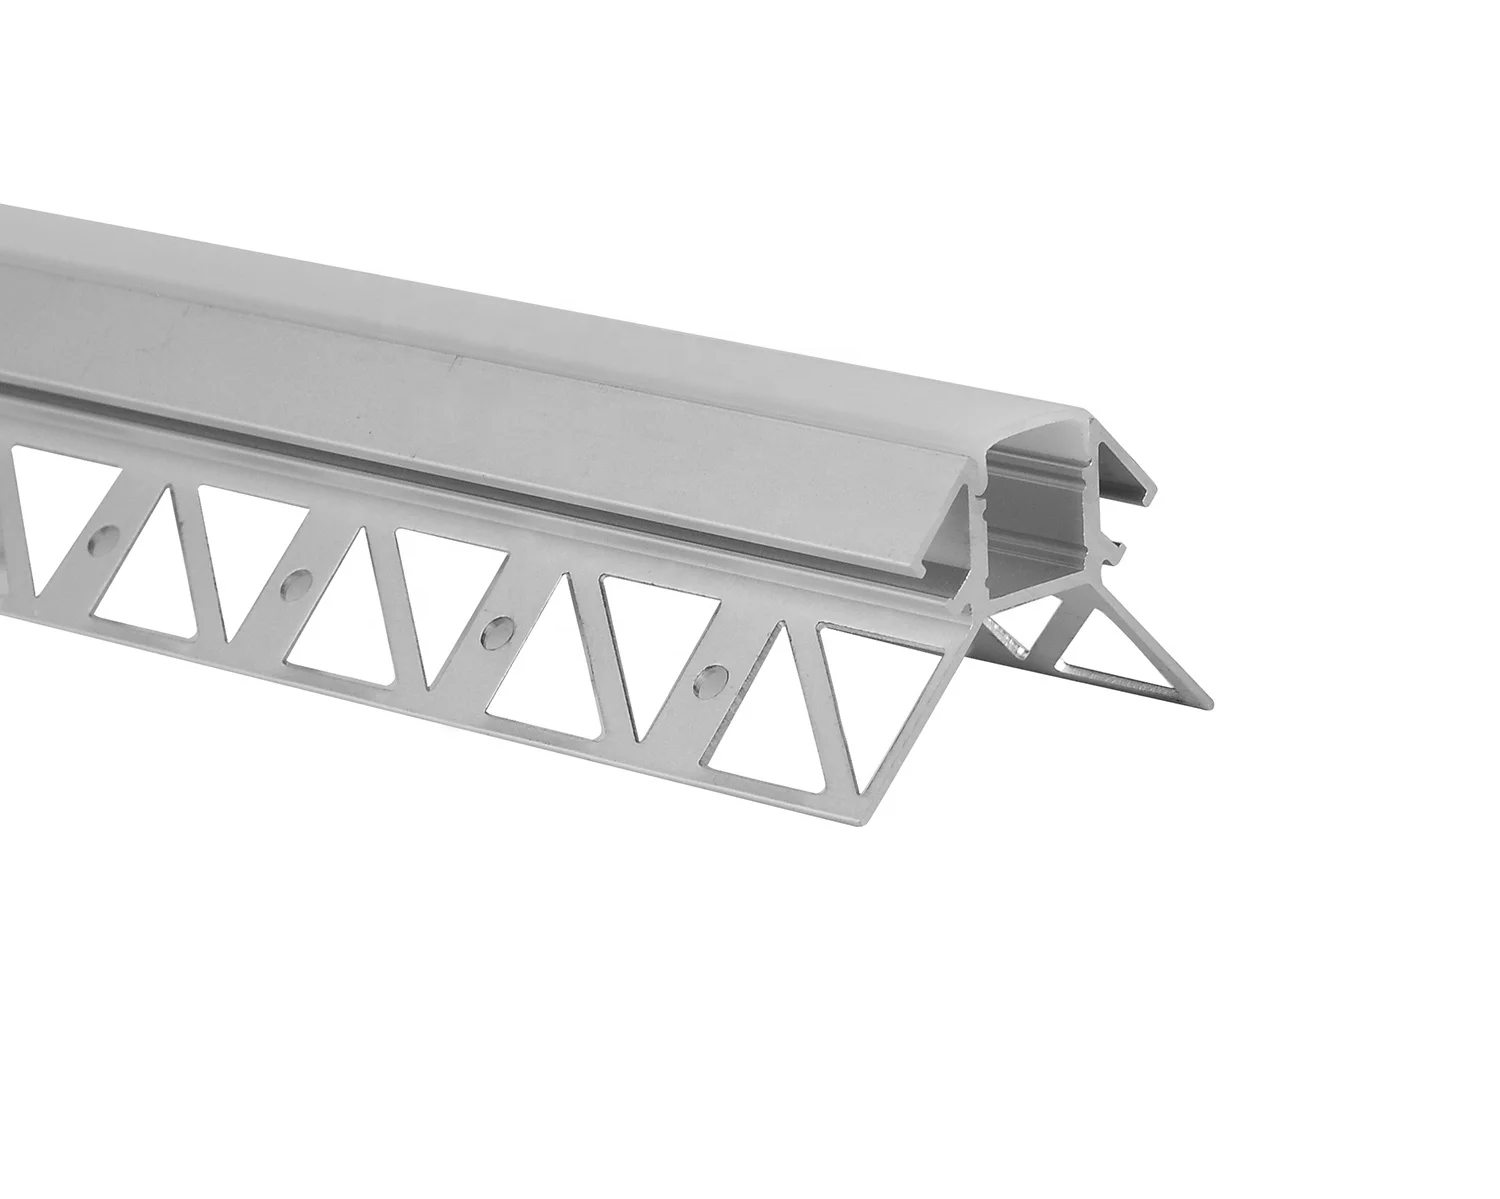 home or commercial using cast aluminum light fixture housing for gypsum wall to decorative or as additional lighting